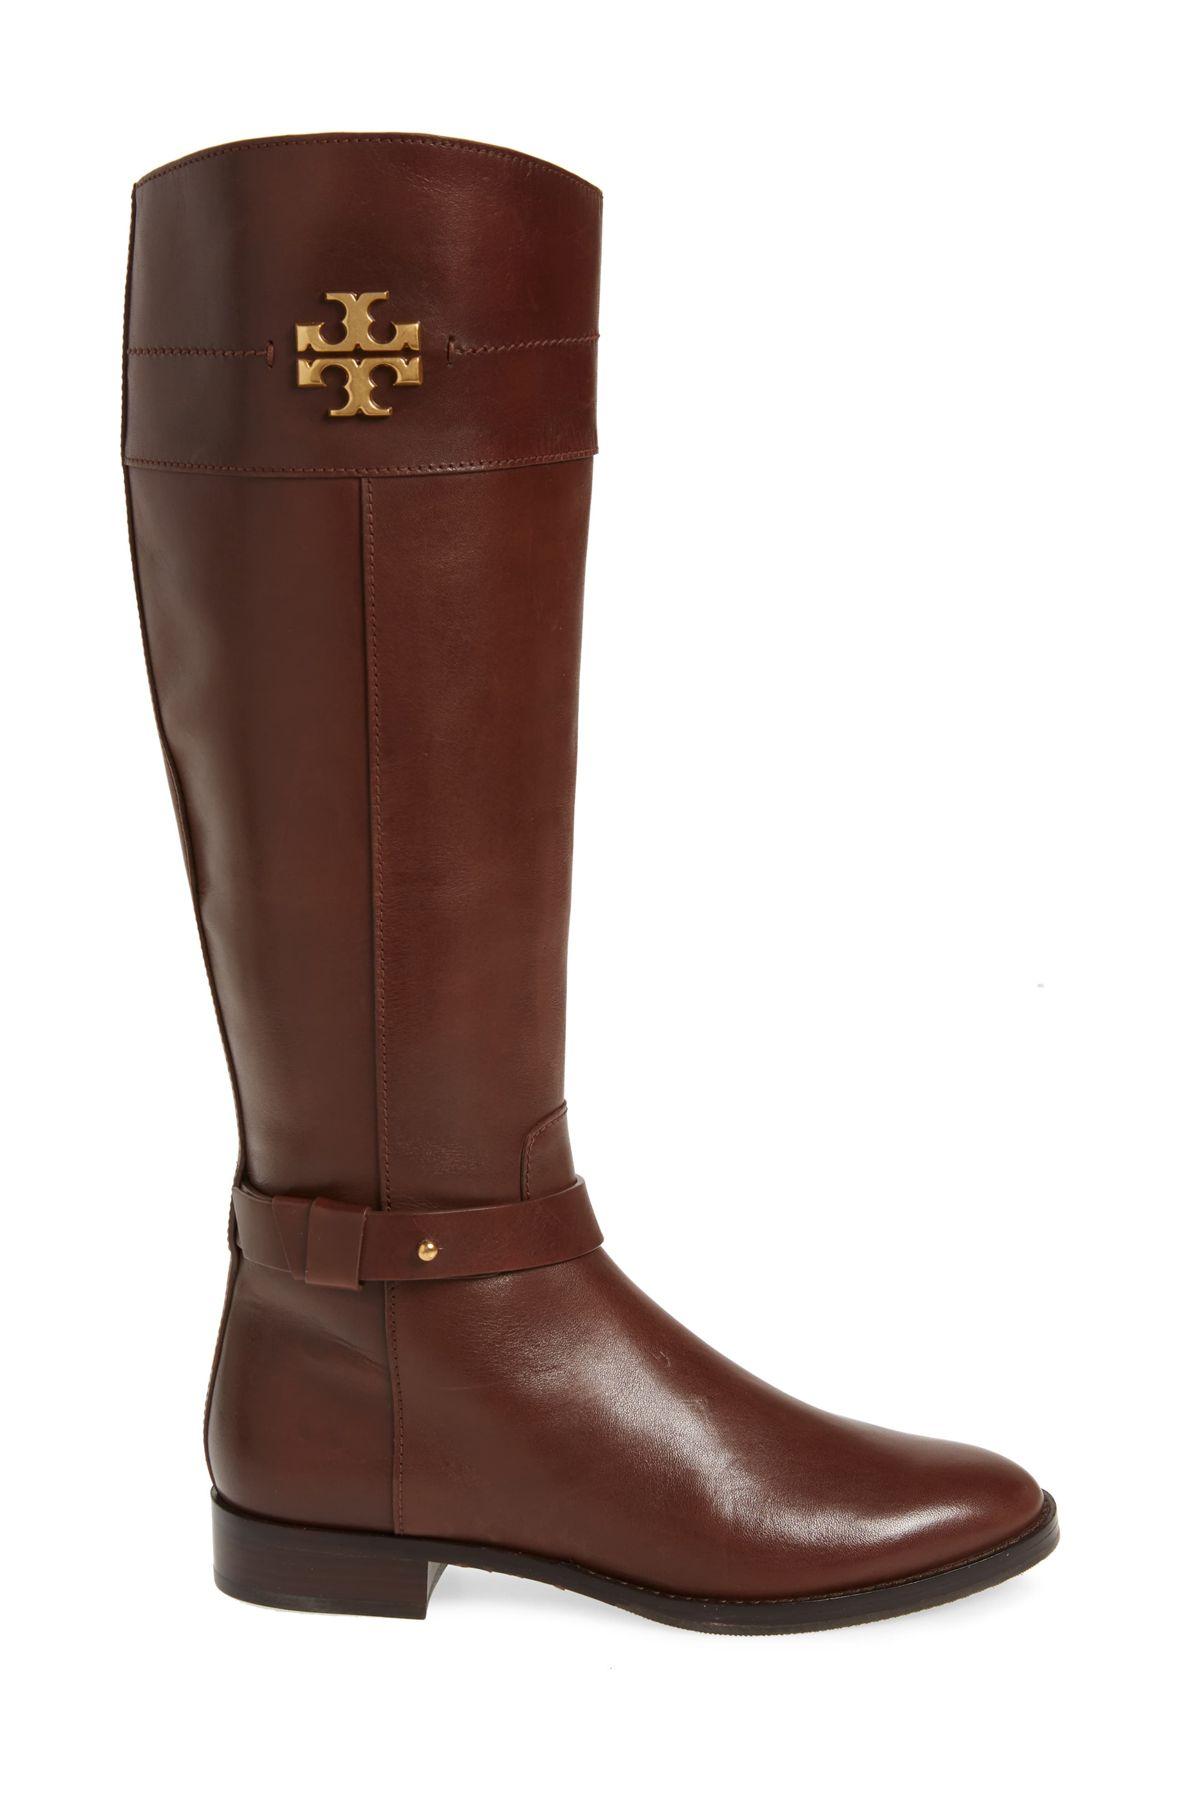 Tory Burch Leather Everly Knee High Boot in Brown - Lyst